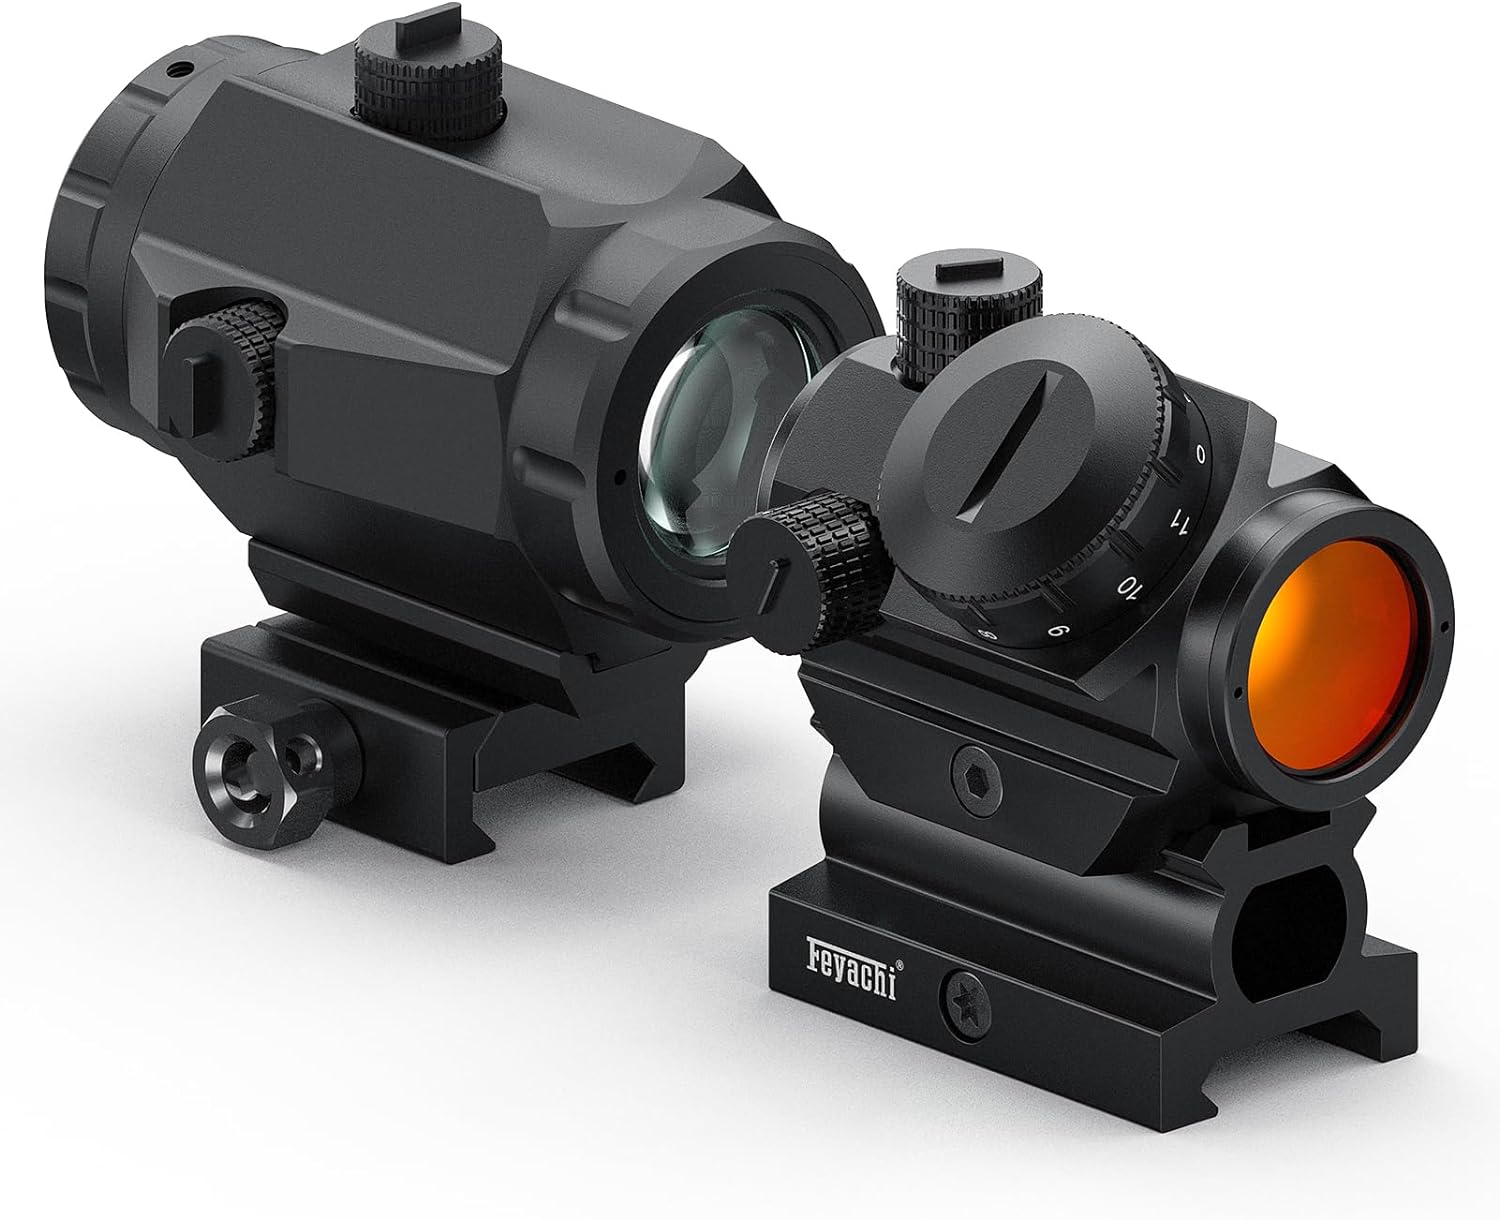 Feyachi RS-23 Red Dot Sight with M40 3X Magnifier Combo Kit, Multiple Reticle System Red Dot Sight & Magnifier Built-in Flip Mount Combo